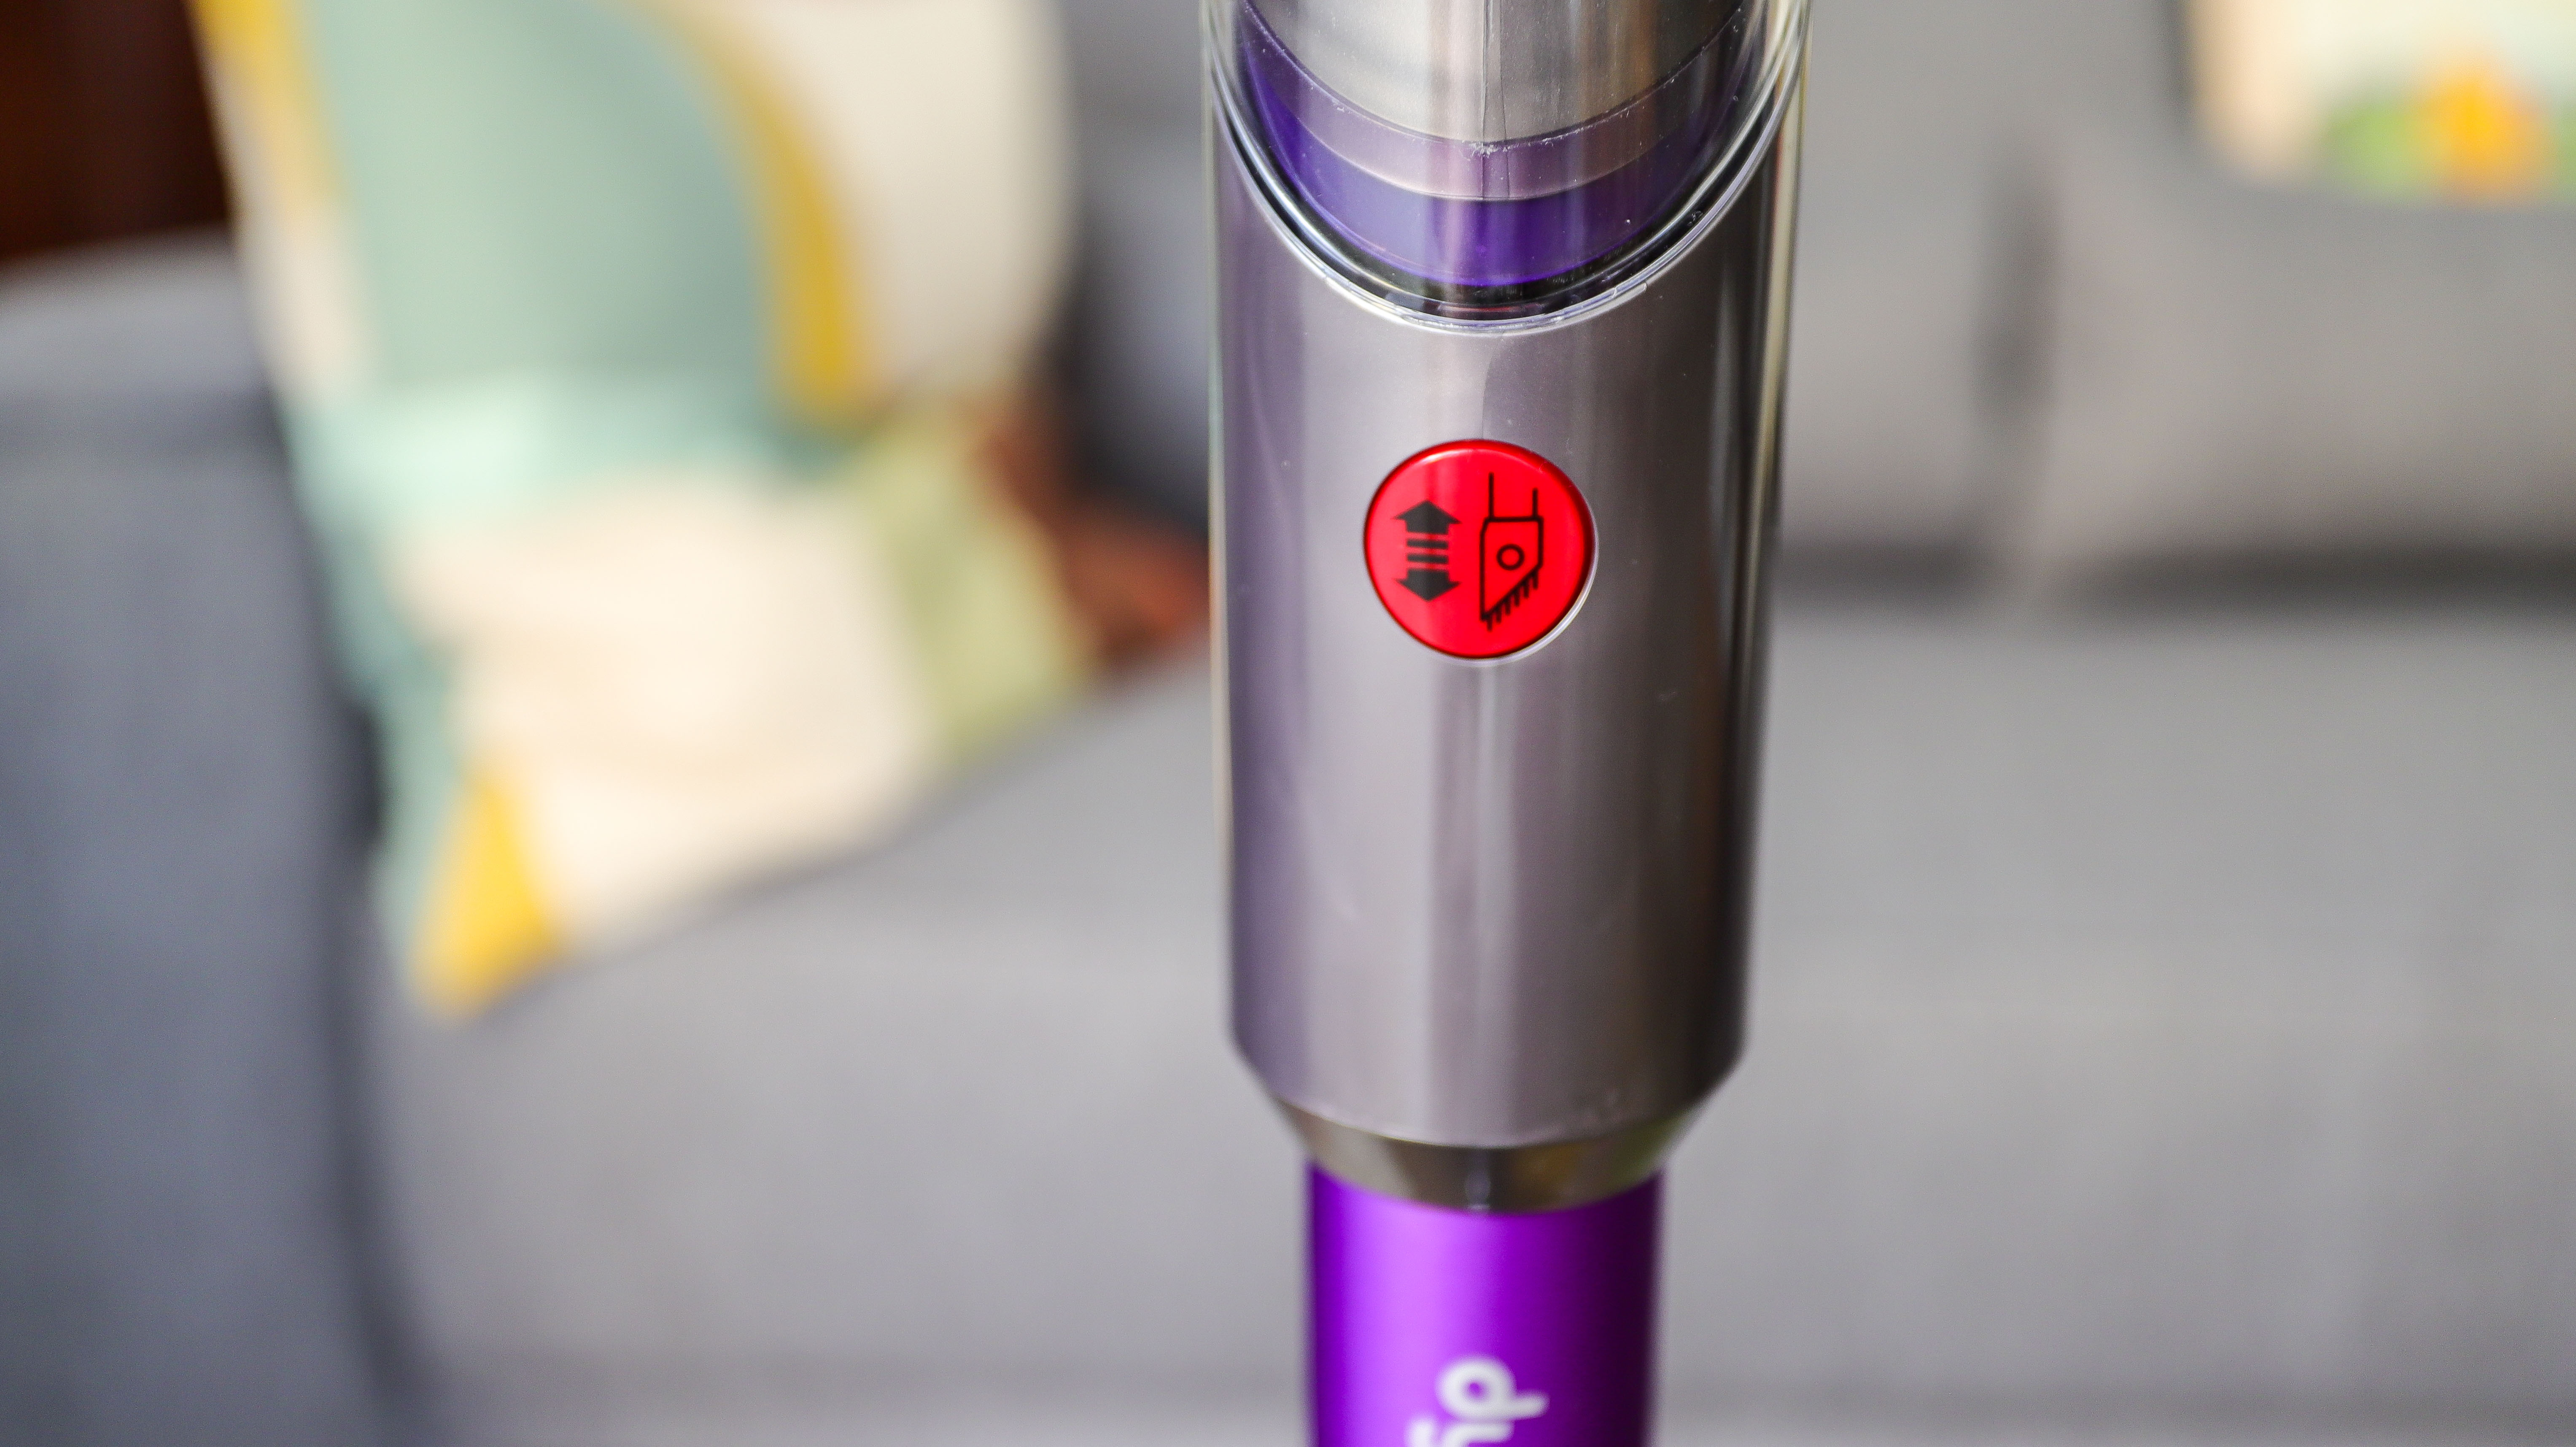 The button to reveal the integrated crevice tool on the Dyson Gen5 Detect's tube